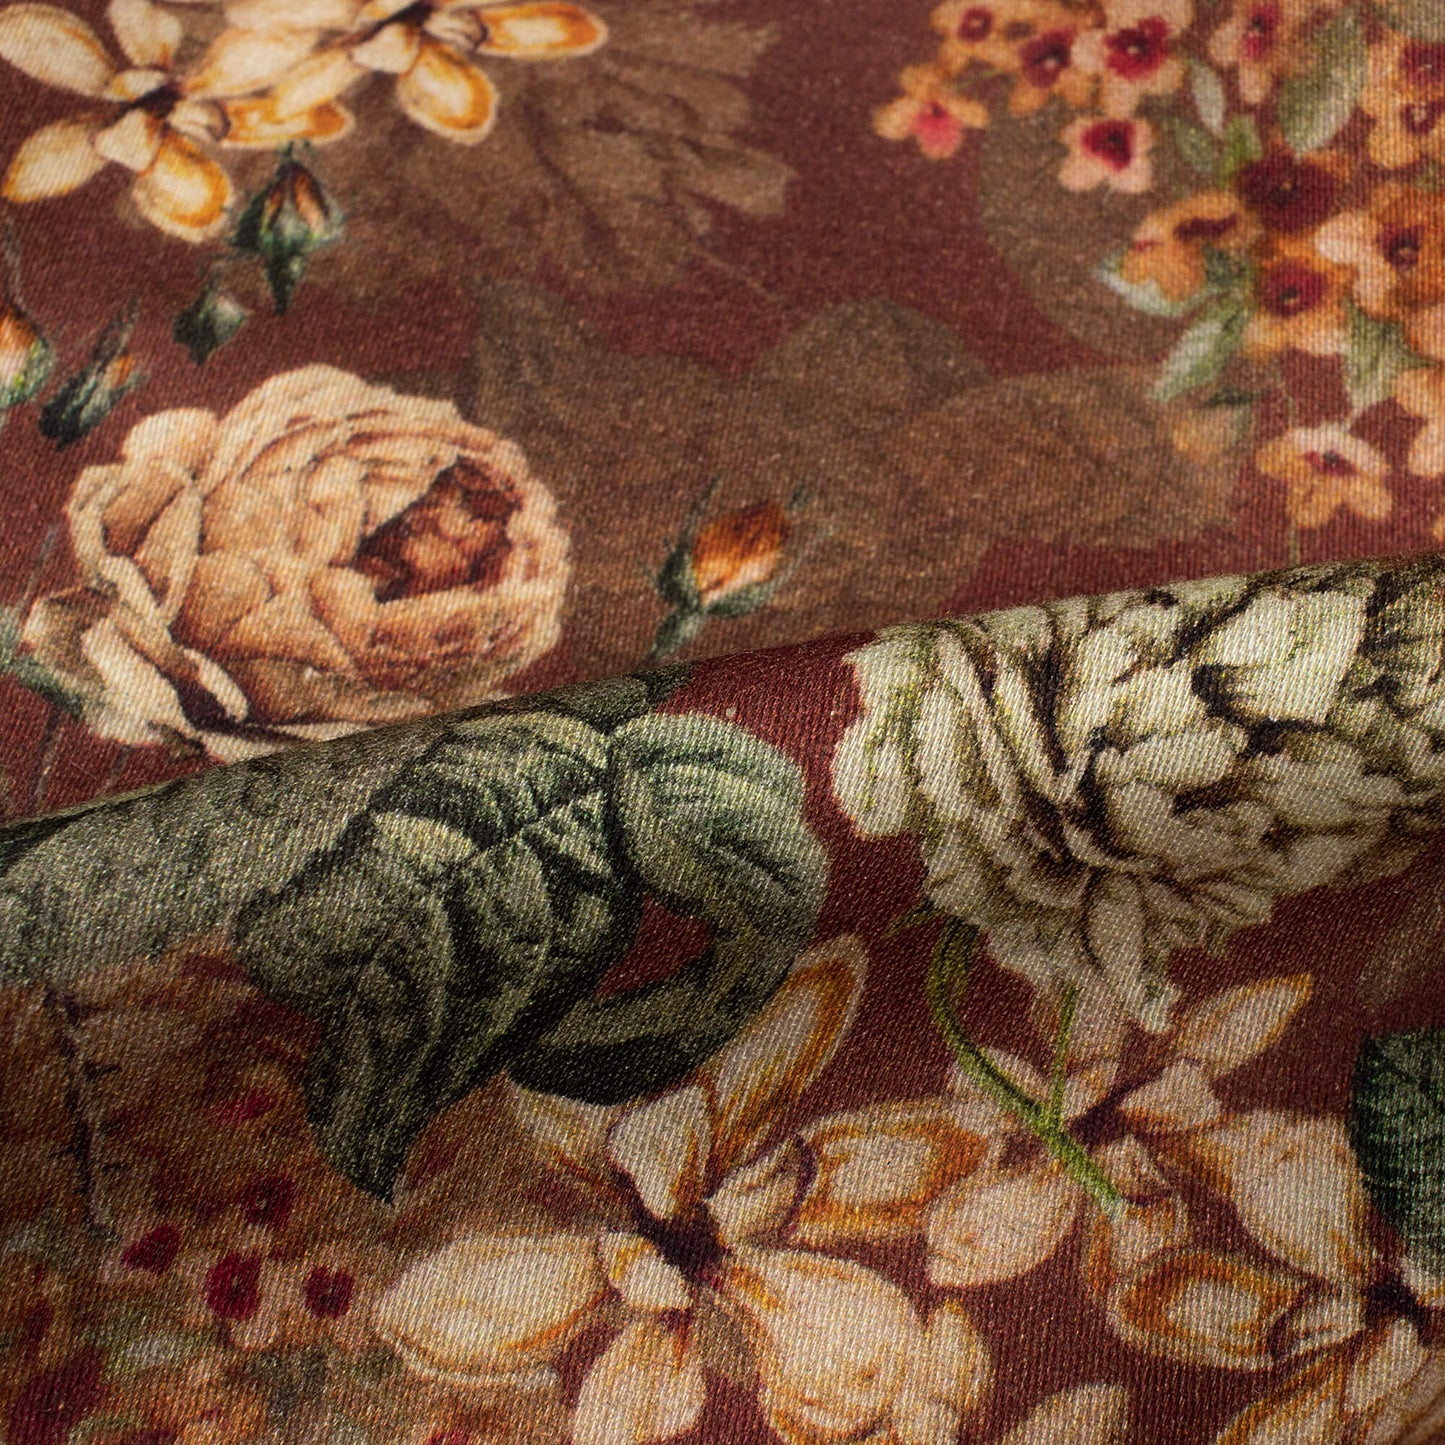 Caramel Brown And Peach Floral Digital Print Viscose Rayon Fabric(Width 58 Inches)